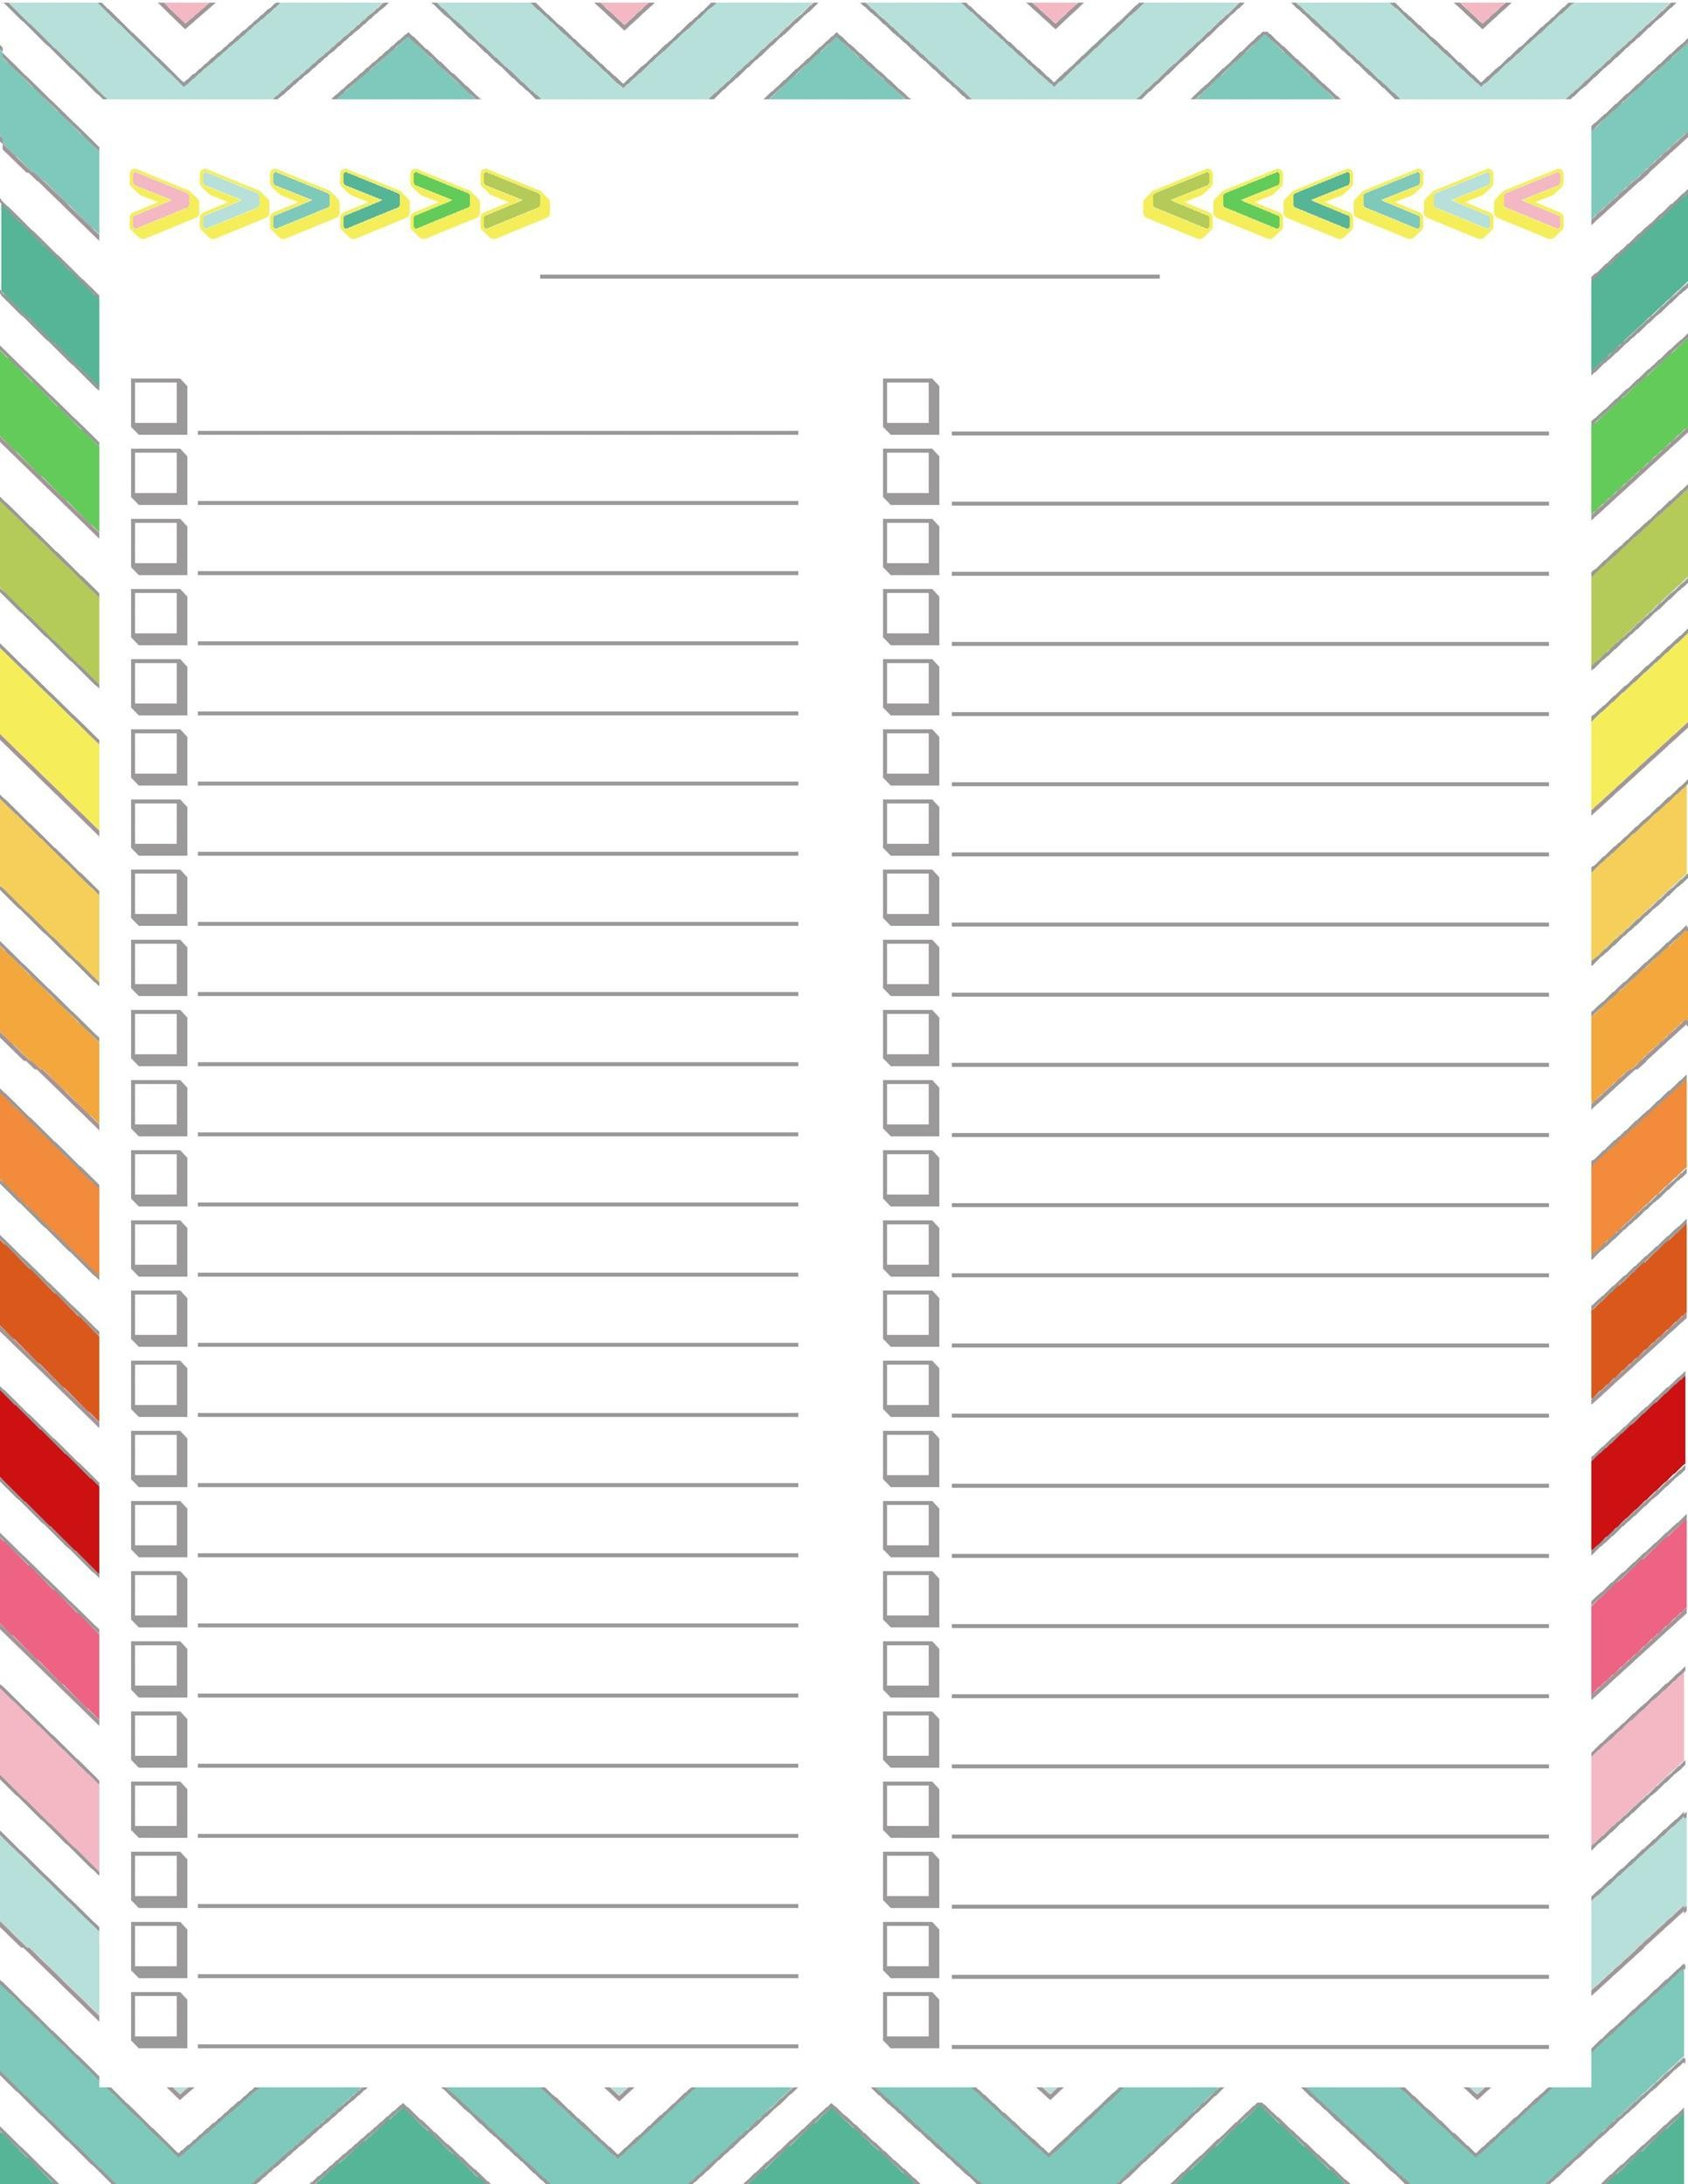 11 Printable To Do List & Checklist Templates (Excel, Word, PDF) With Checklist With Boxes Template For Checklist With Boxes Template